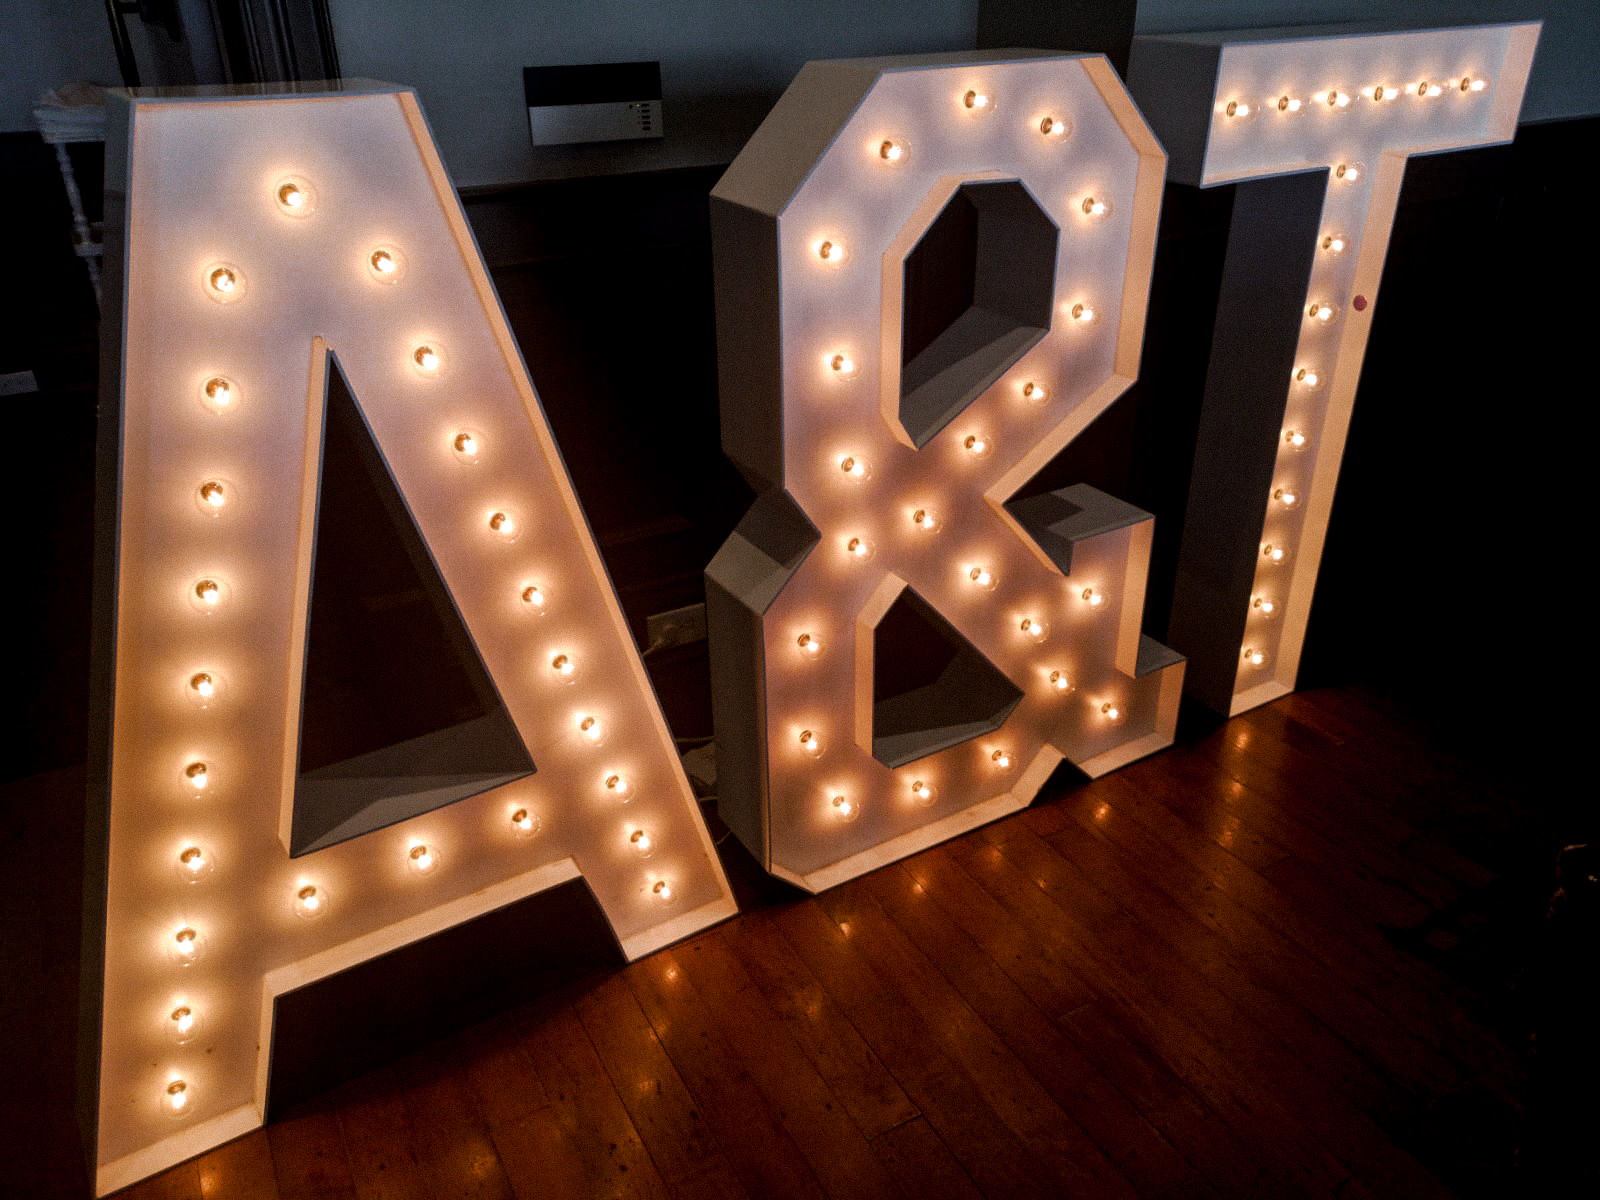 North York Wedding Marquee Letters